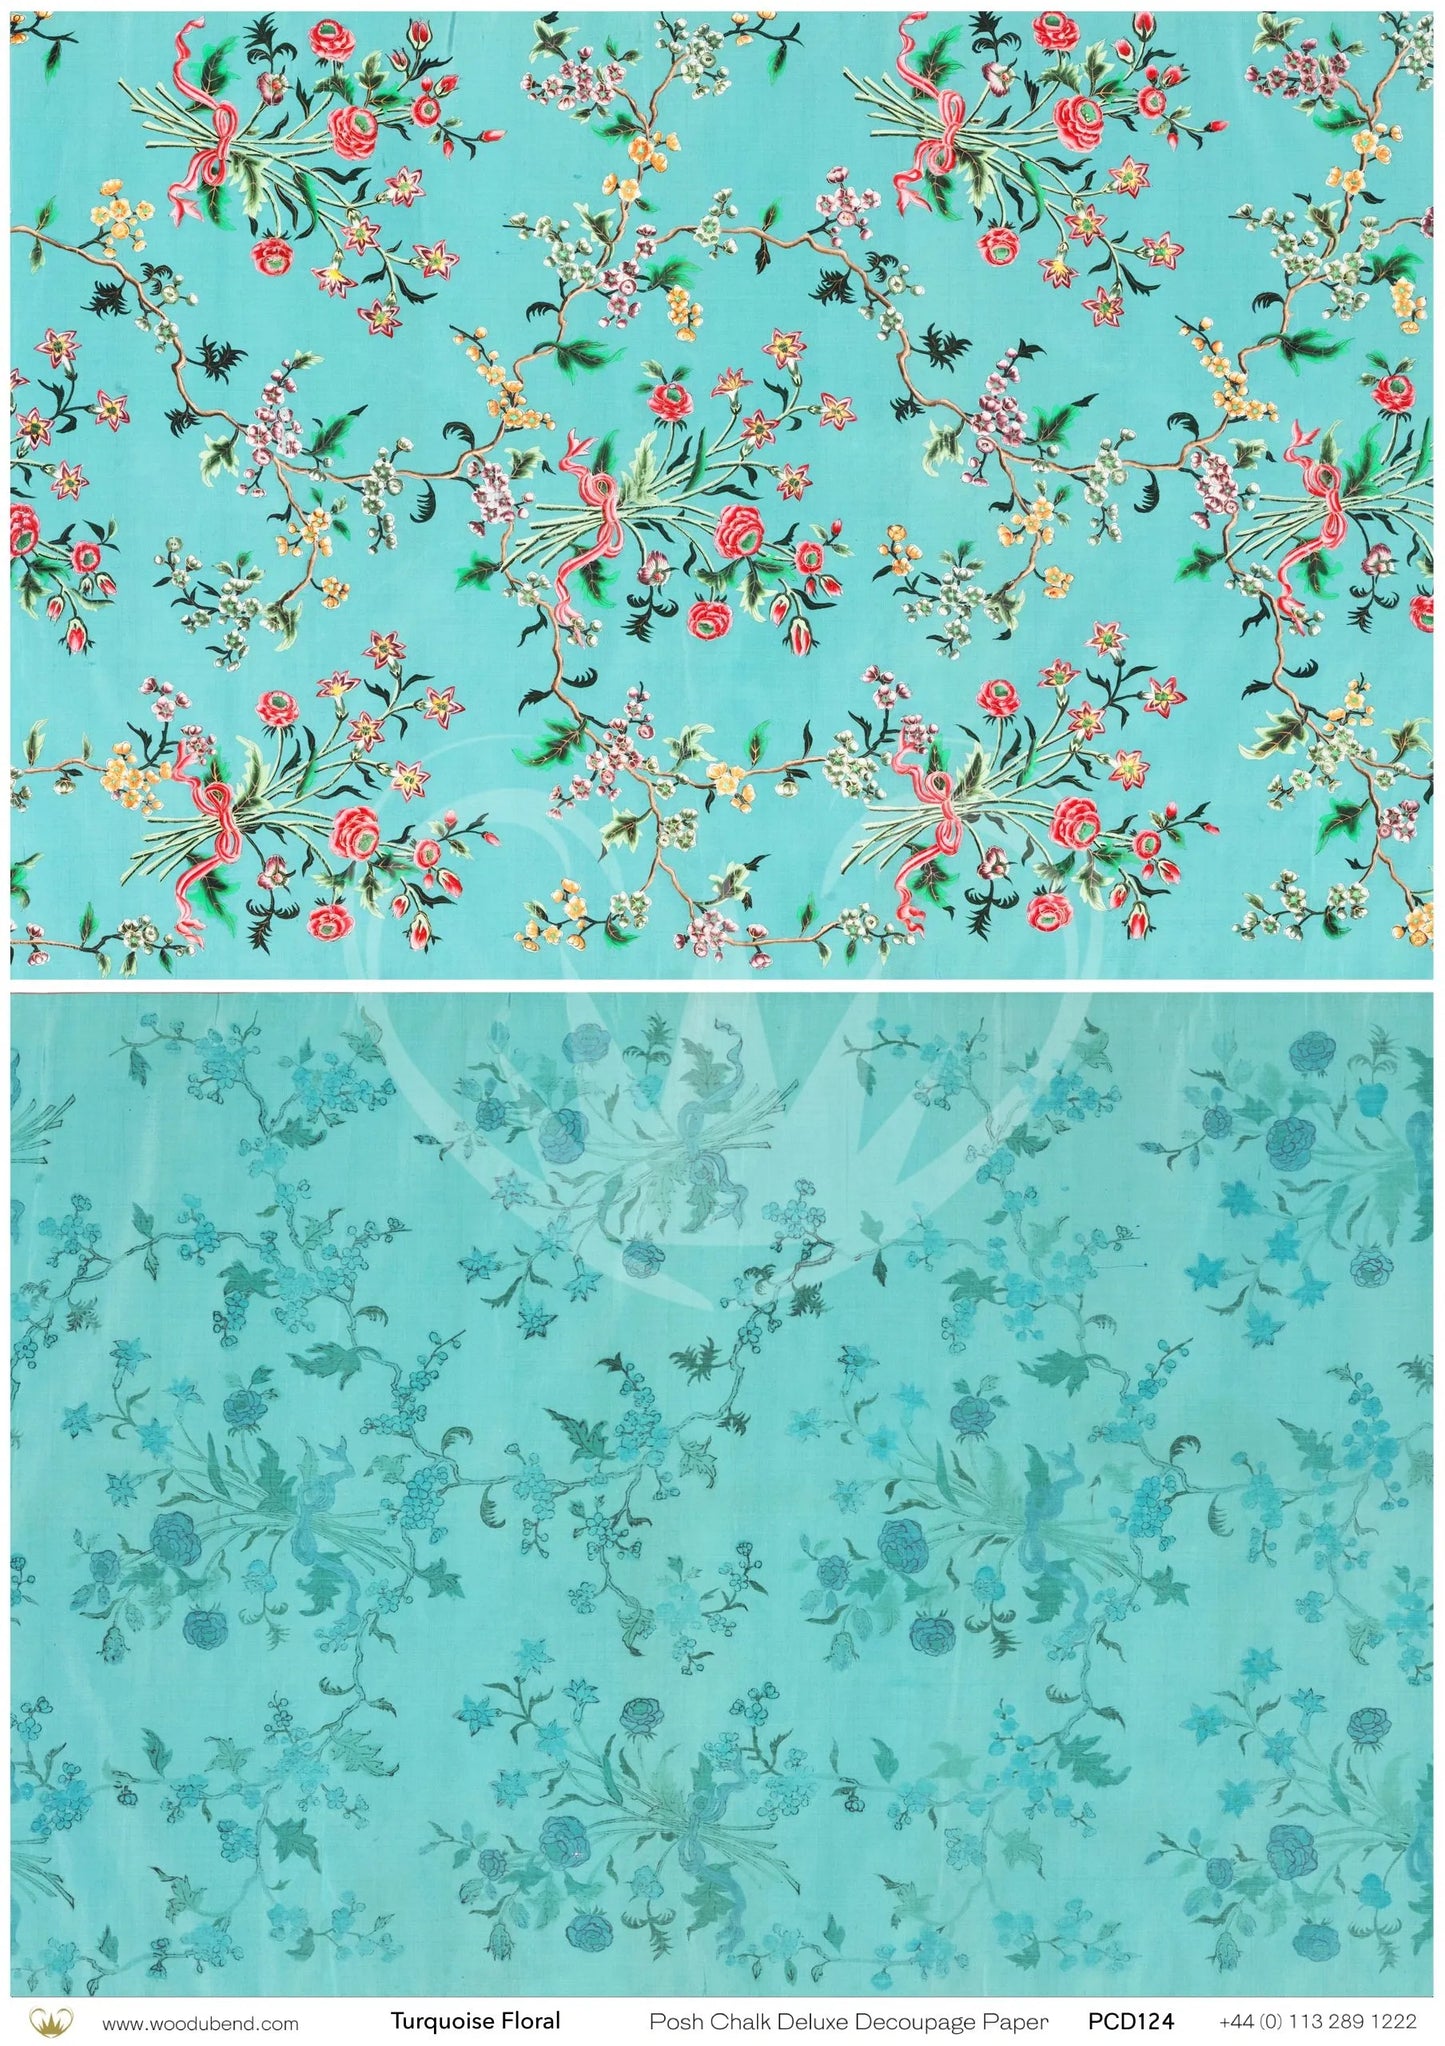 Turquoise Floral A1 Posh Chalk Deluxe Decoupage